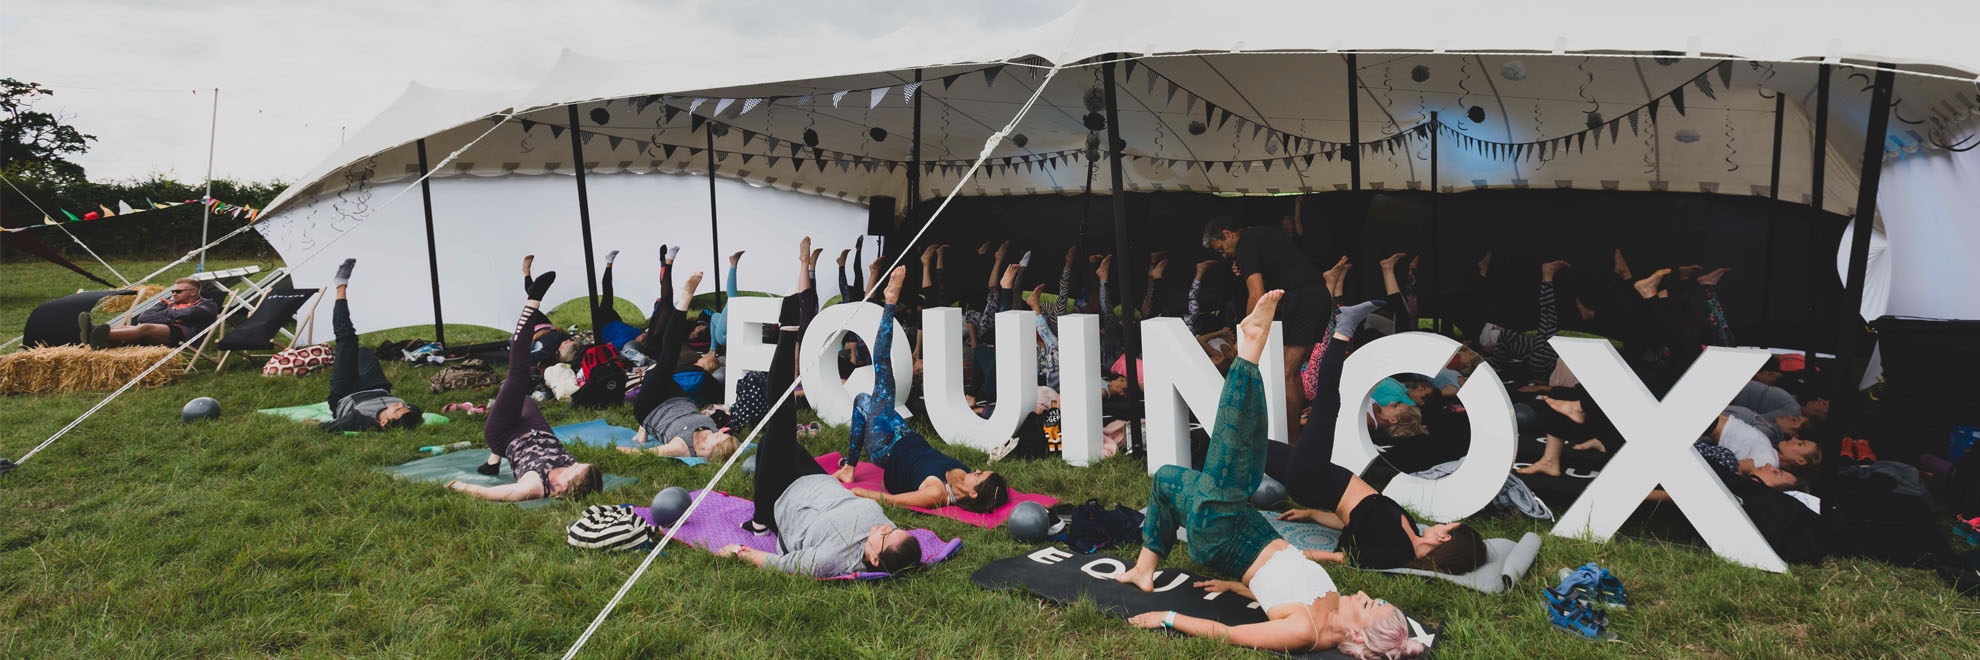 White stretch tent Equinox sign in foreground Yoga lesson in progress